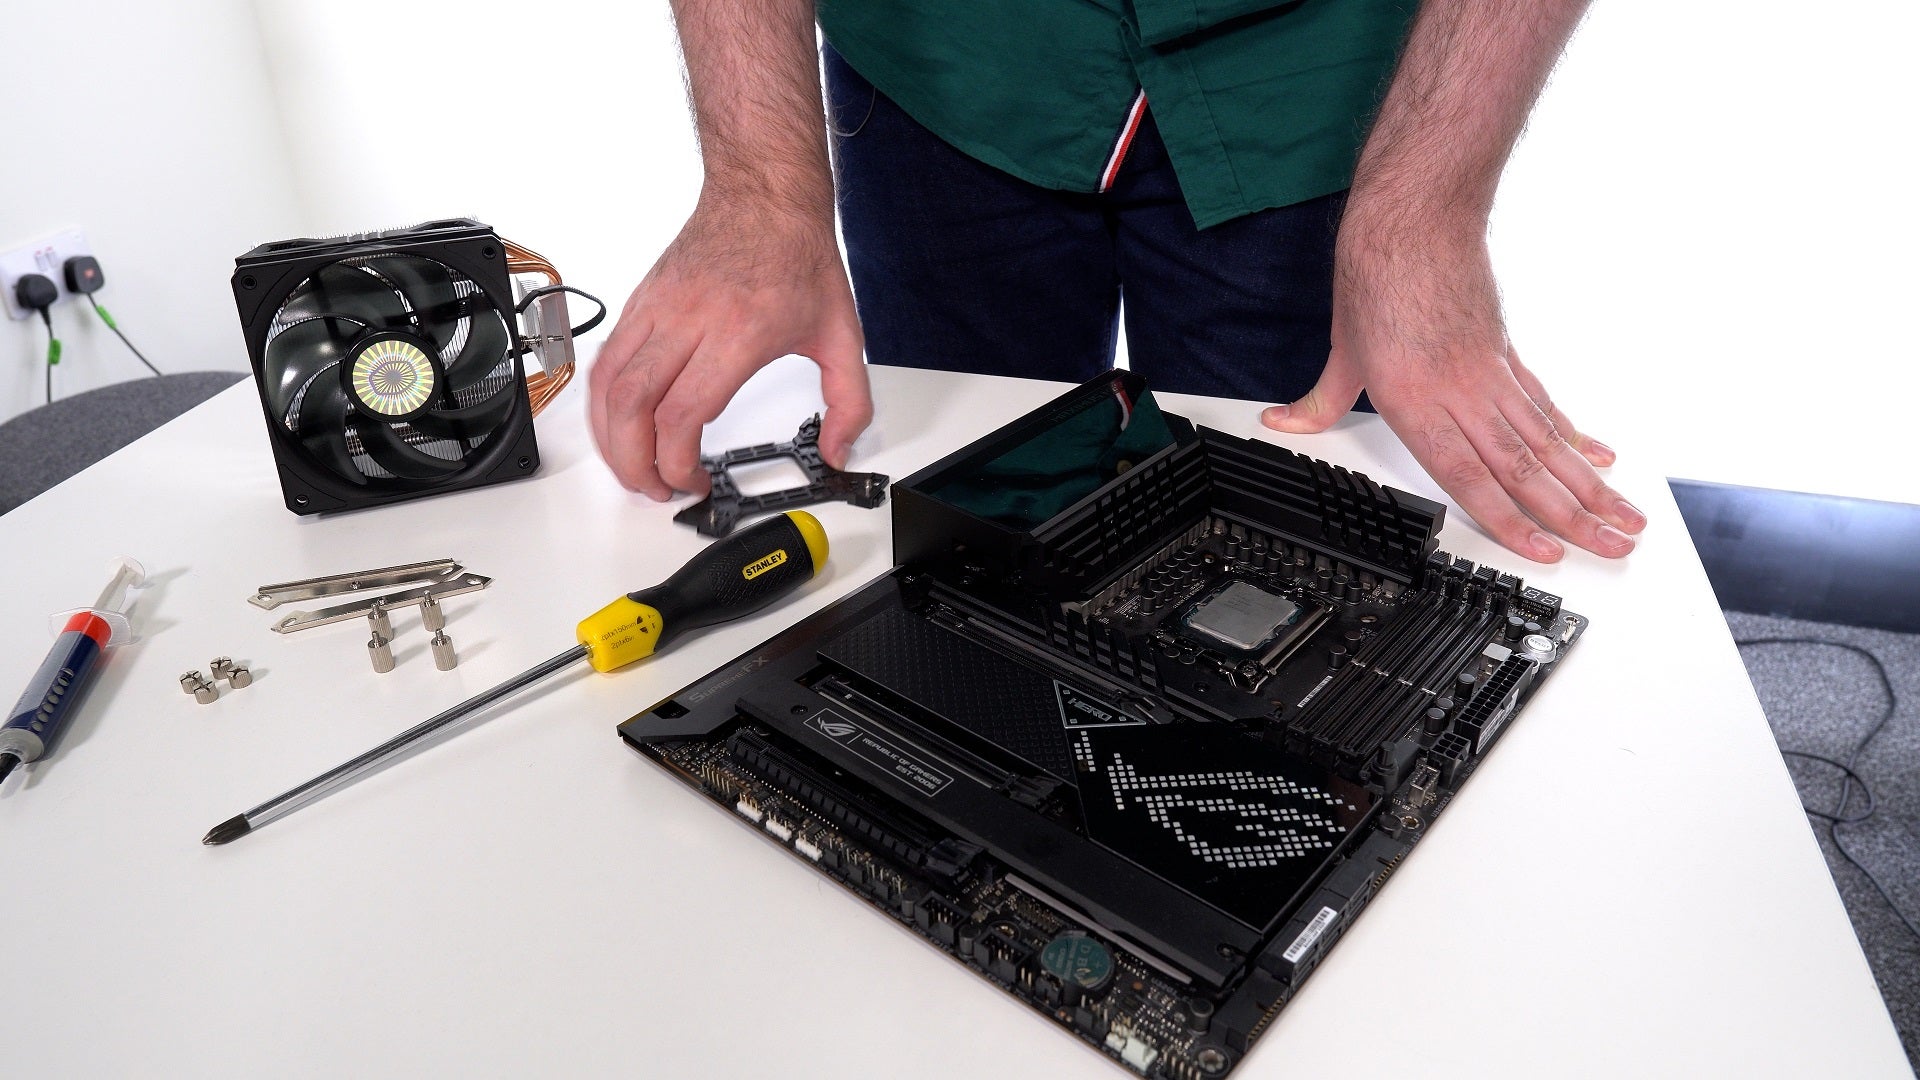 A motherboard (with CPU installed) sits on a table next to a screwdriver and CPU cooler, waiting to be installed.